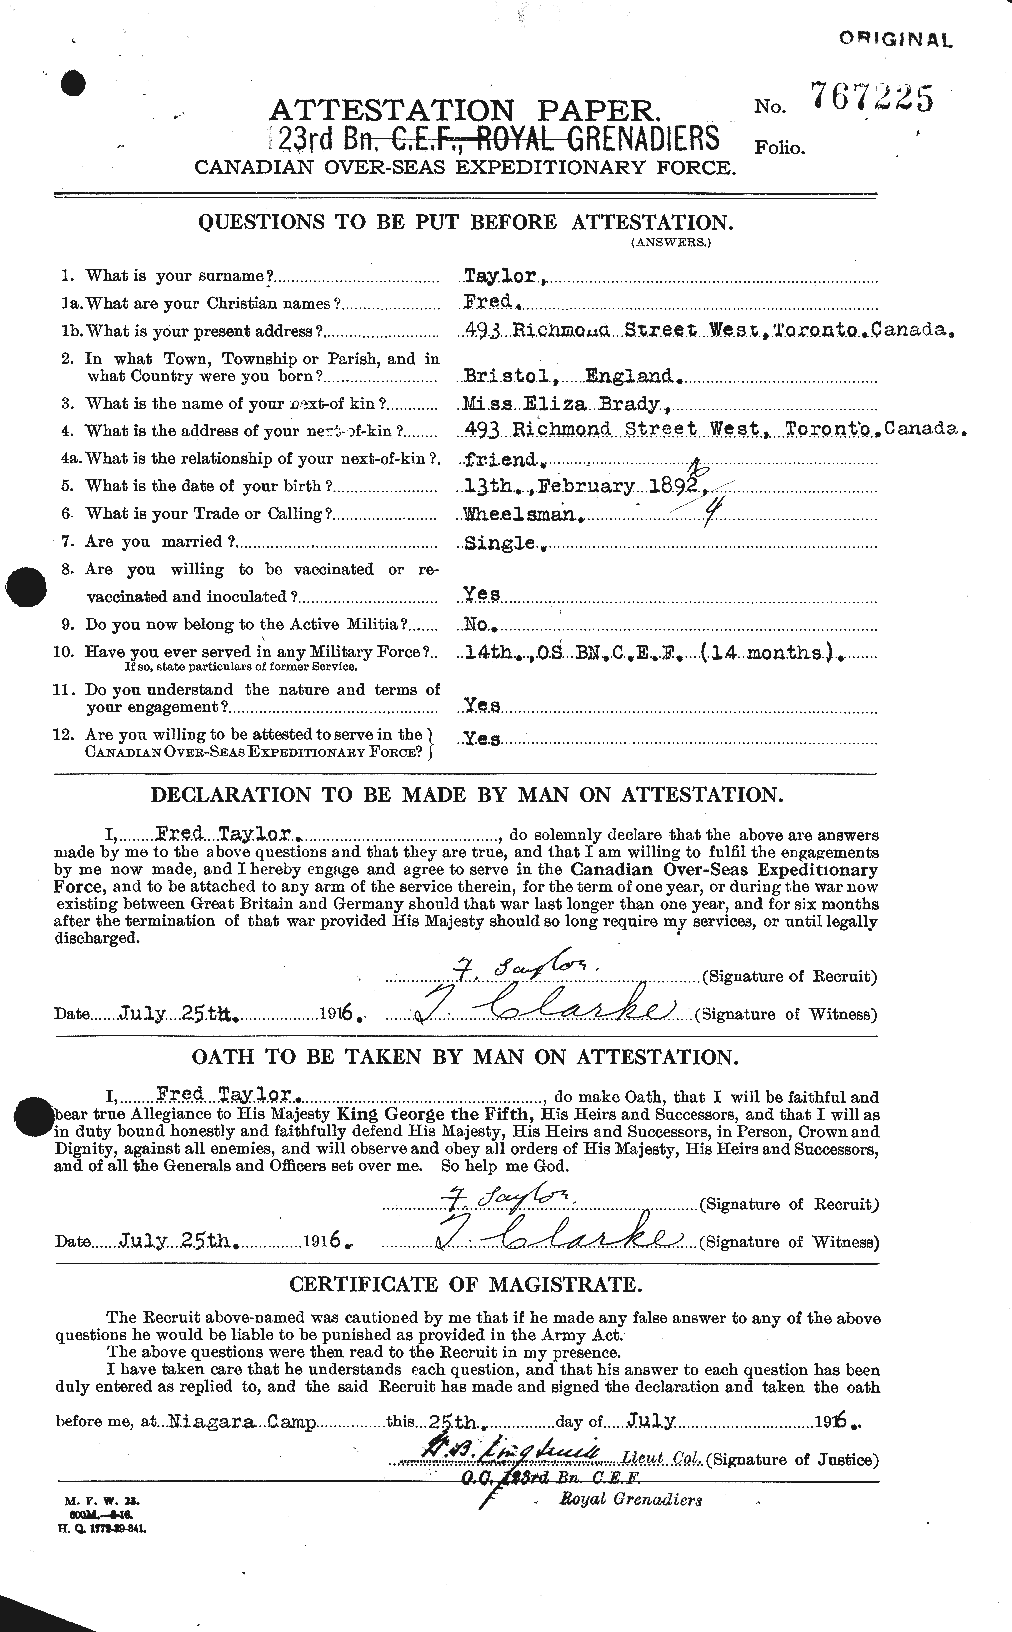 Personnel Records of the First World War - CEF 625739a